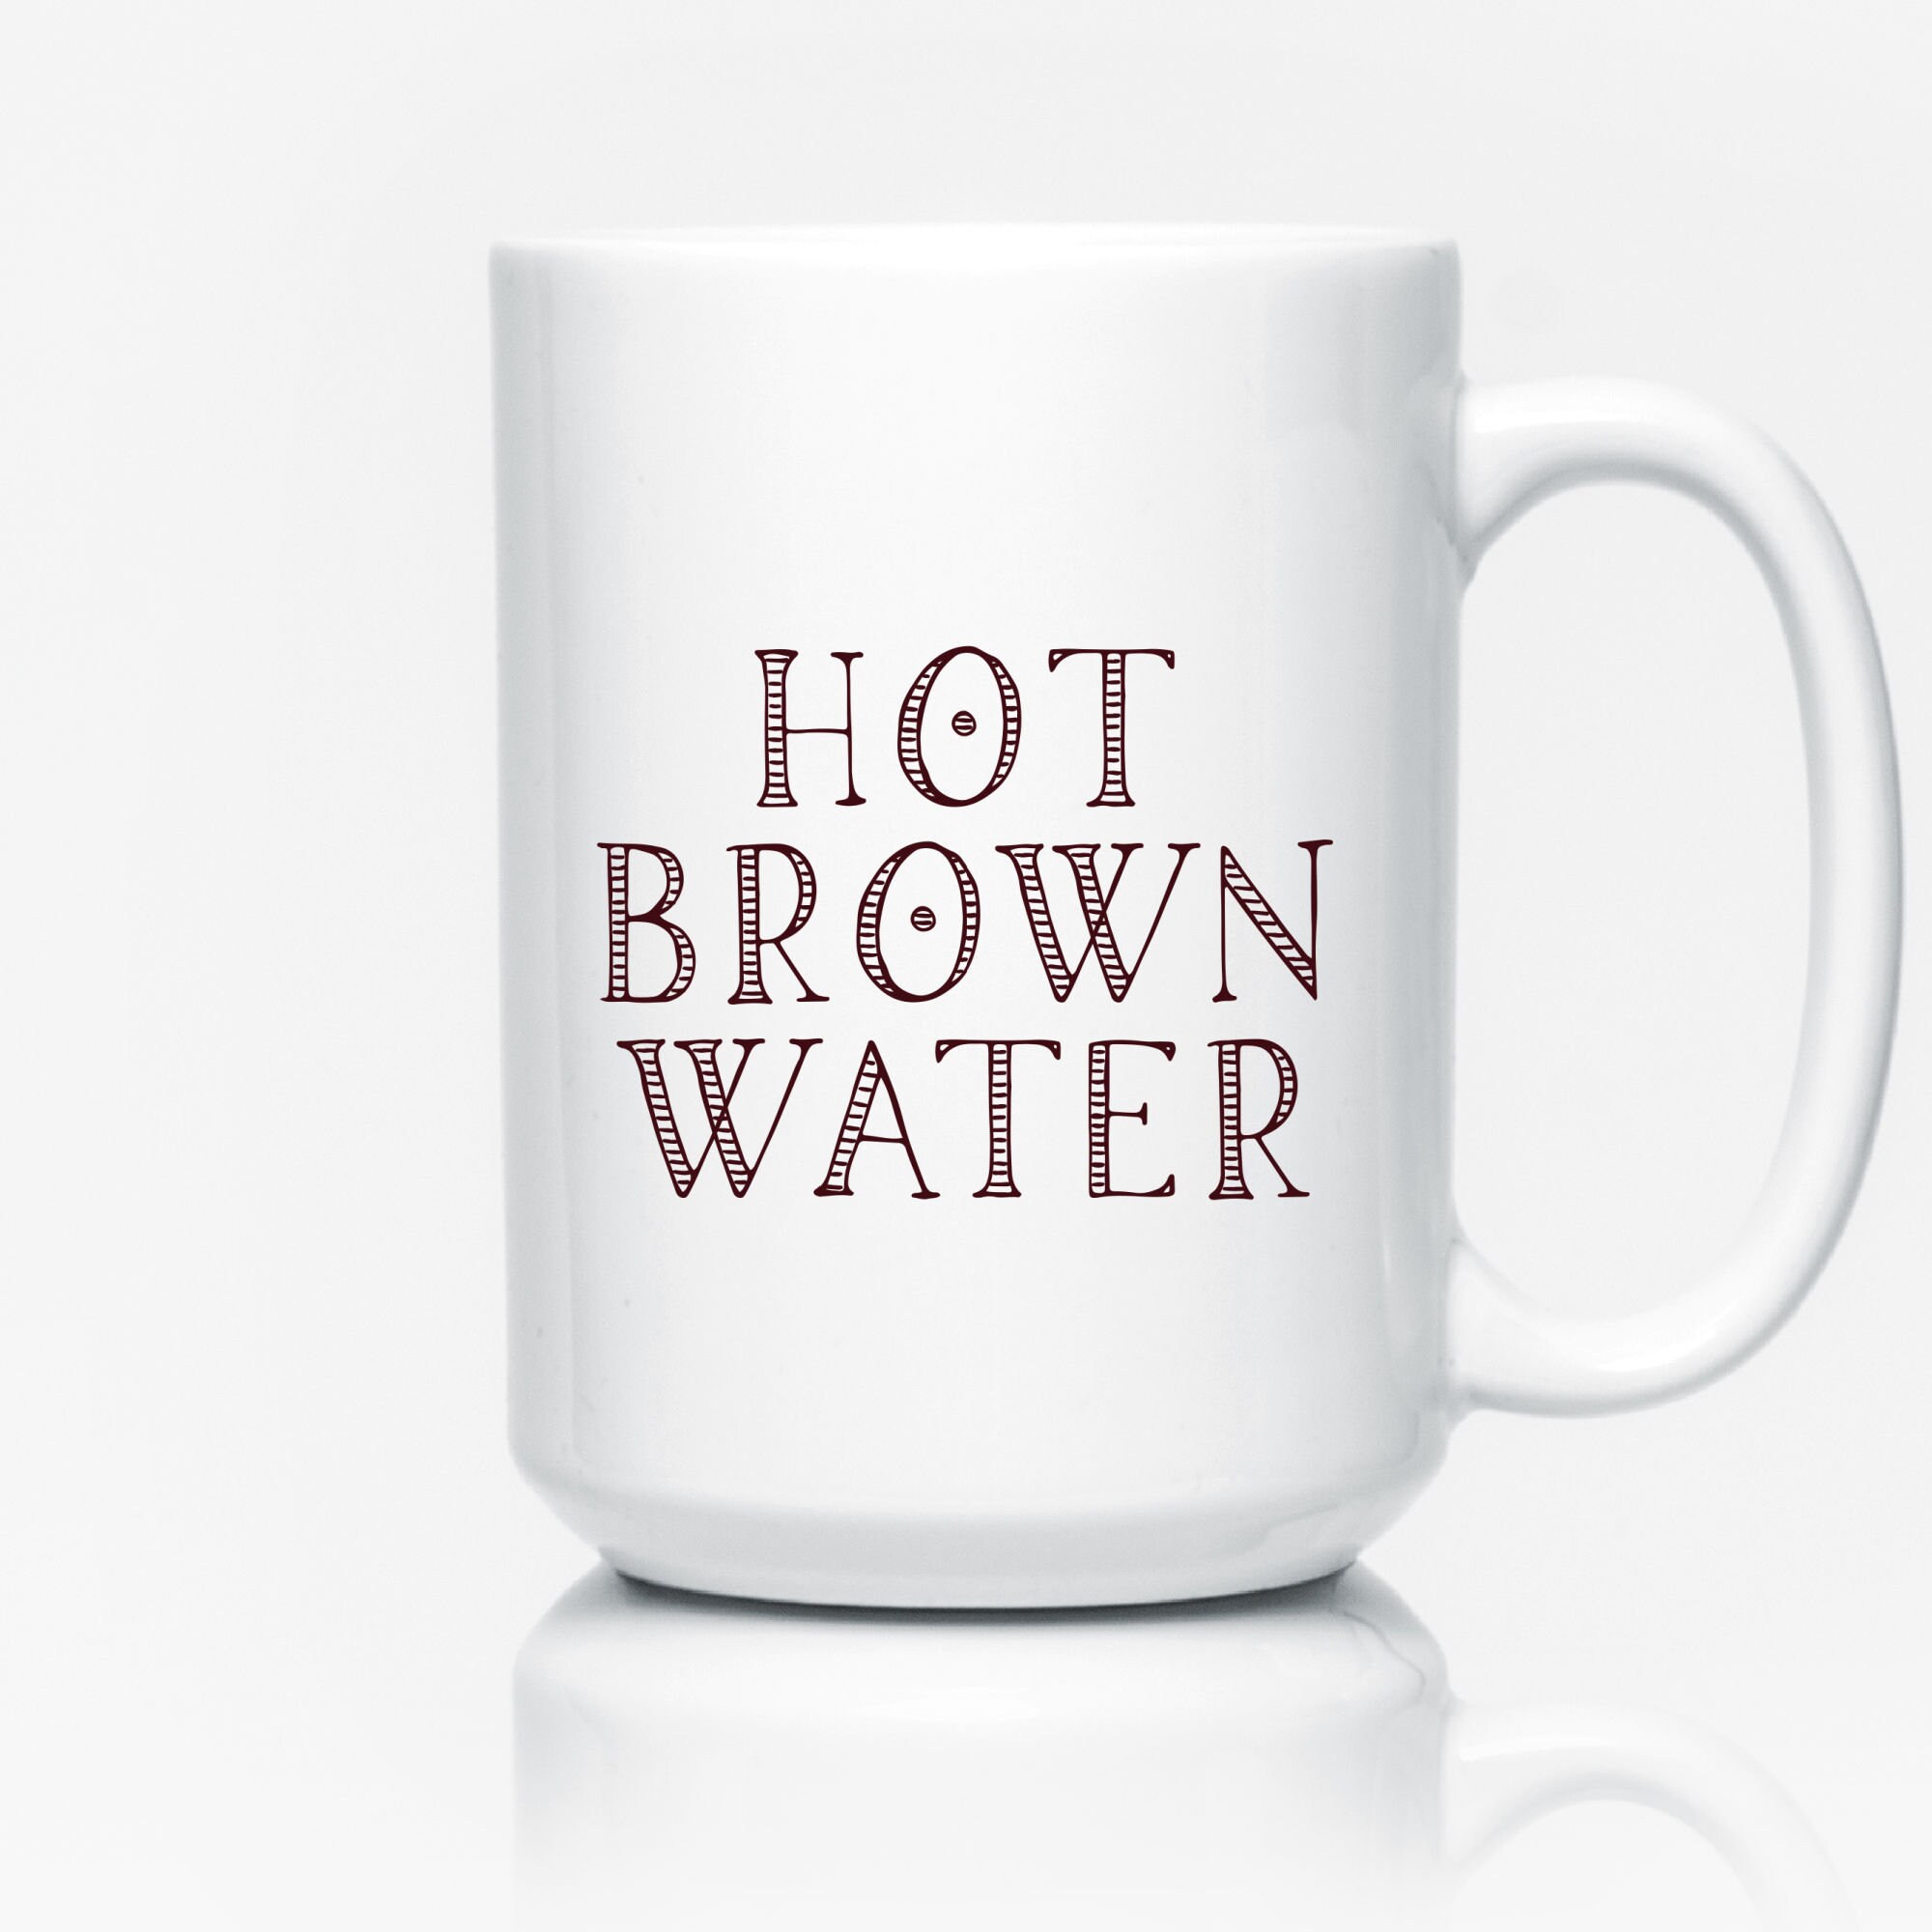 I Love Water Funny Drinking Quotes Coffee & Tea Gift Mug Cup